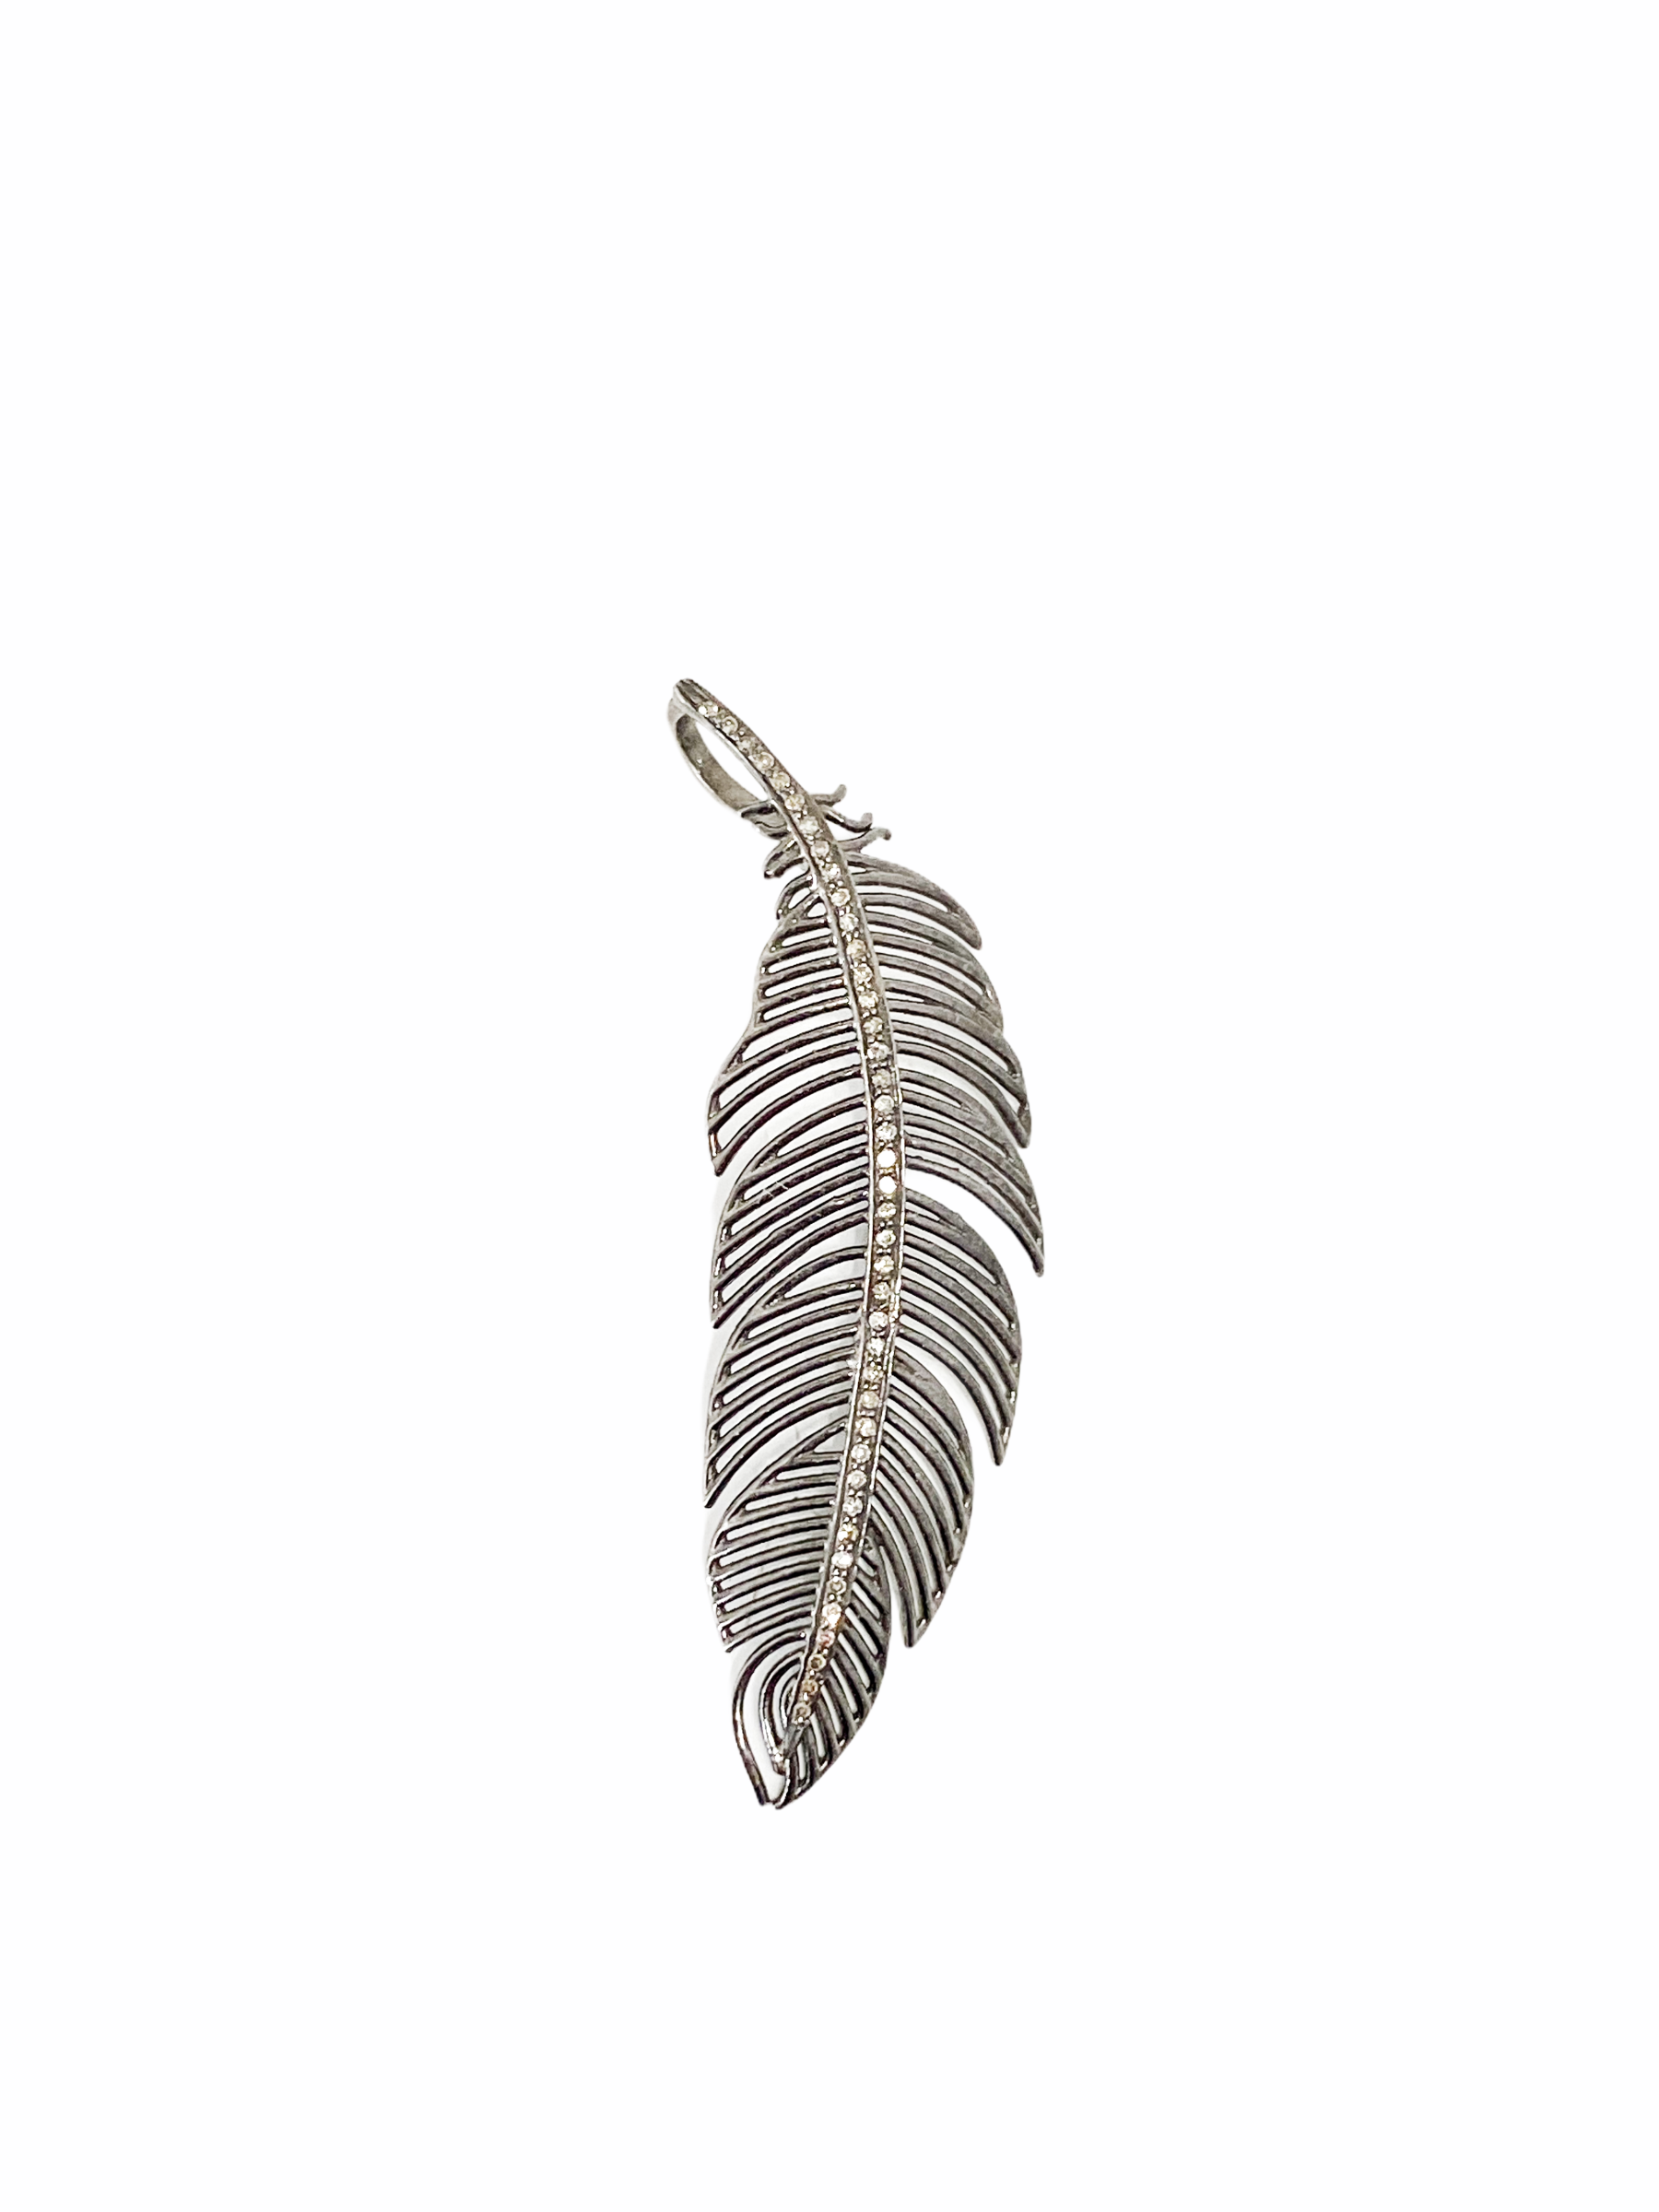 S.Row Designs Sterling Silver Feather Pendant with Diamonds